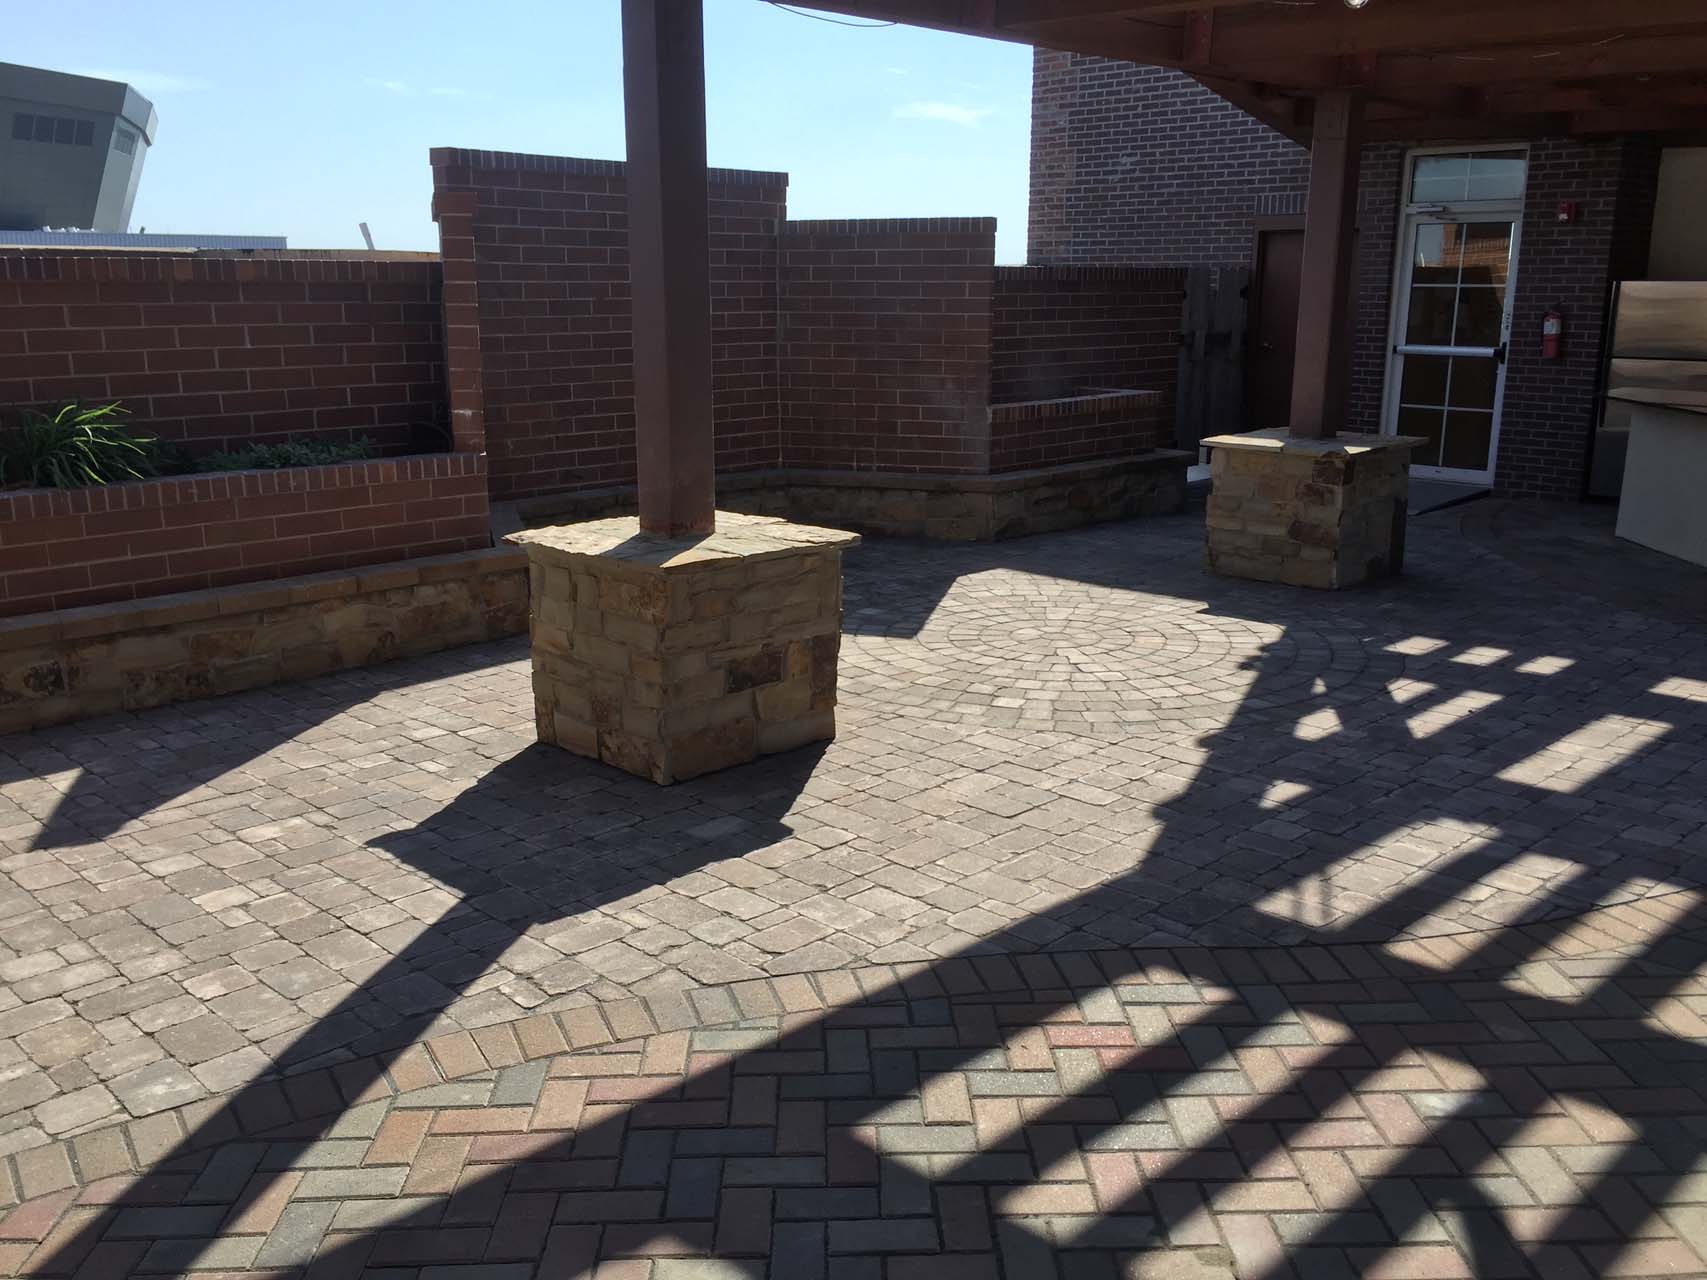 Finished outdoor space with brick patio and rock columns